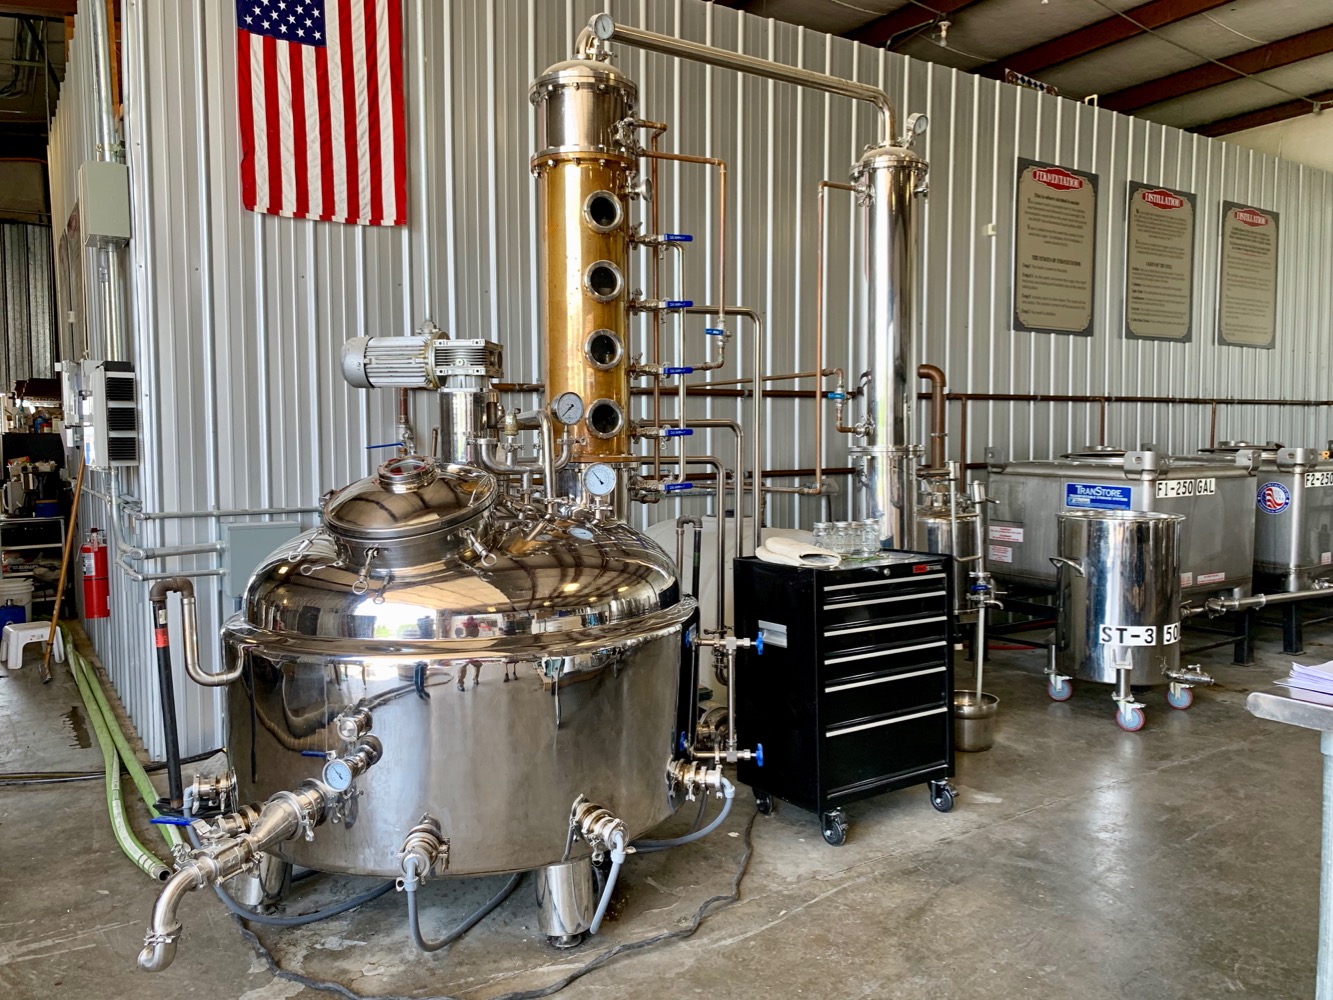 Still and Fermenters - Dueling Grounds Distillery